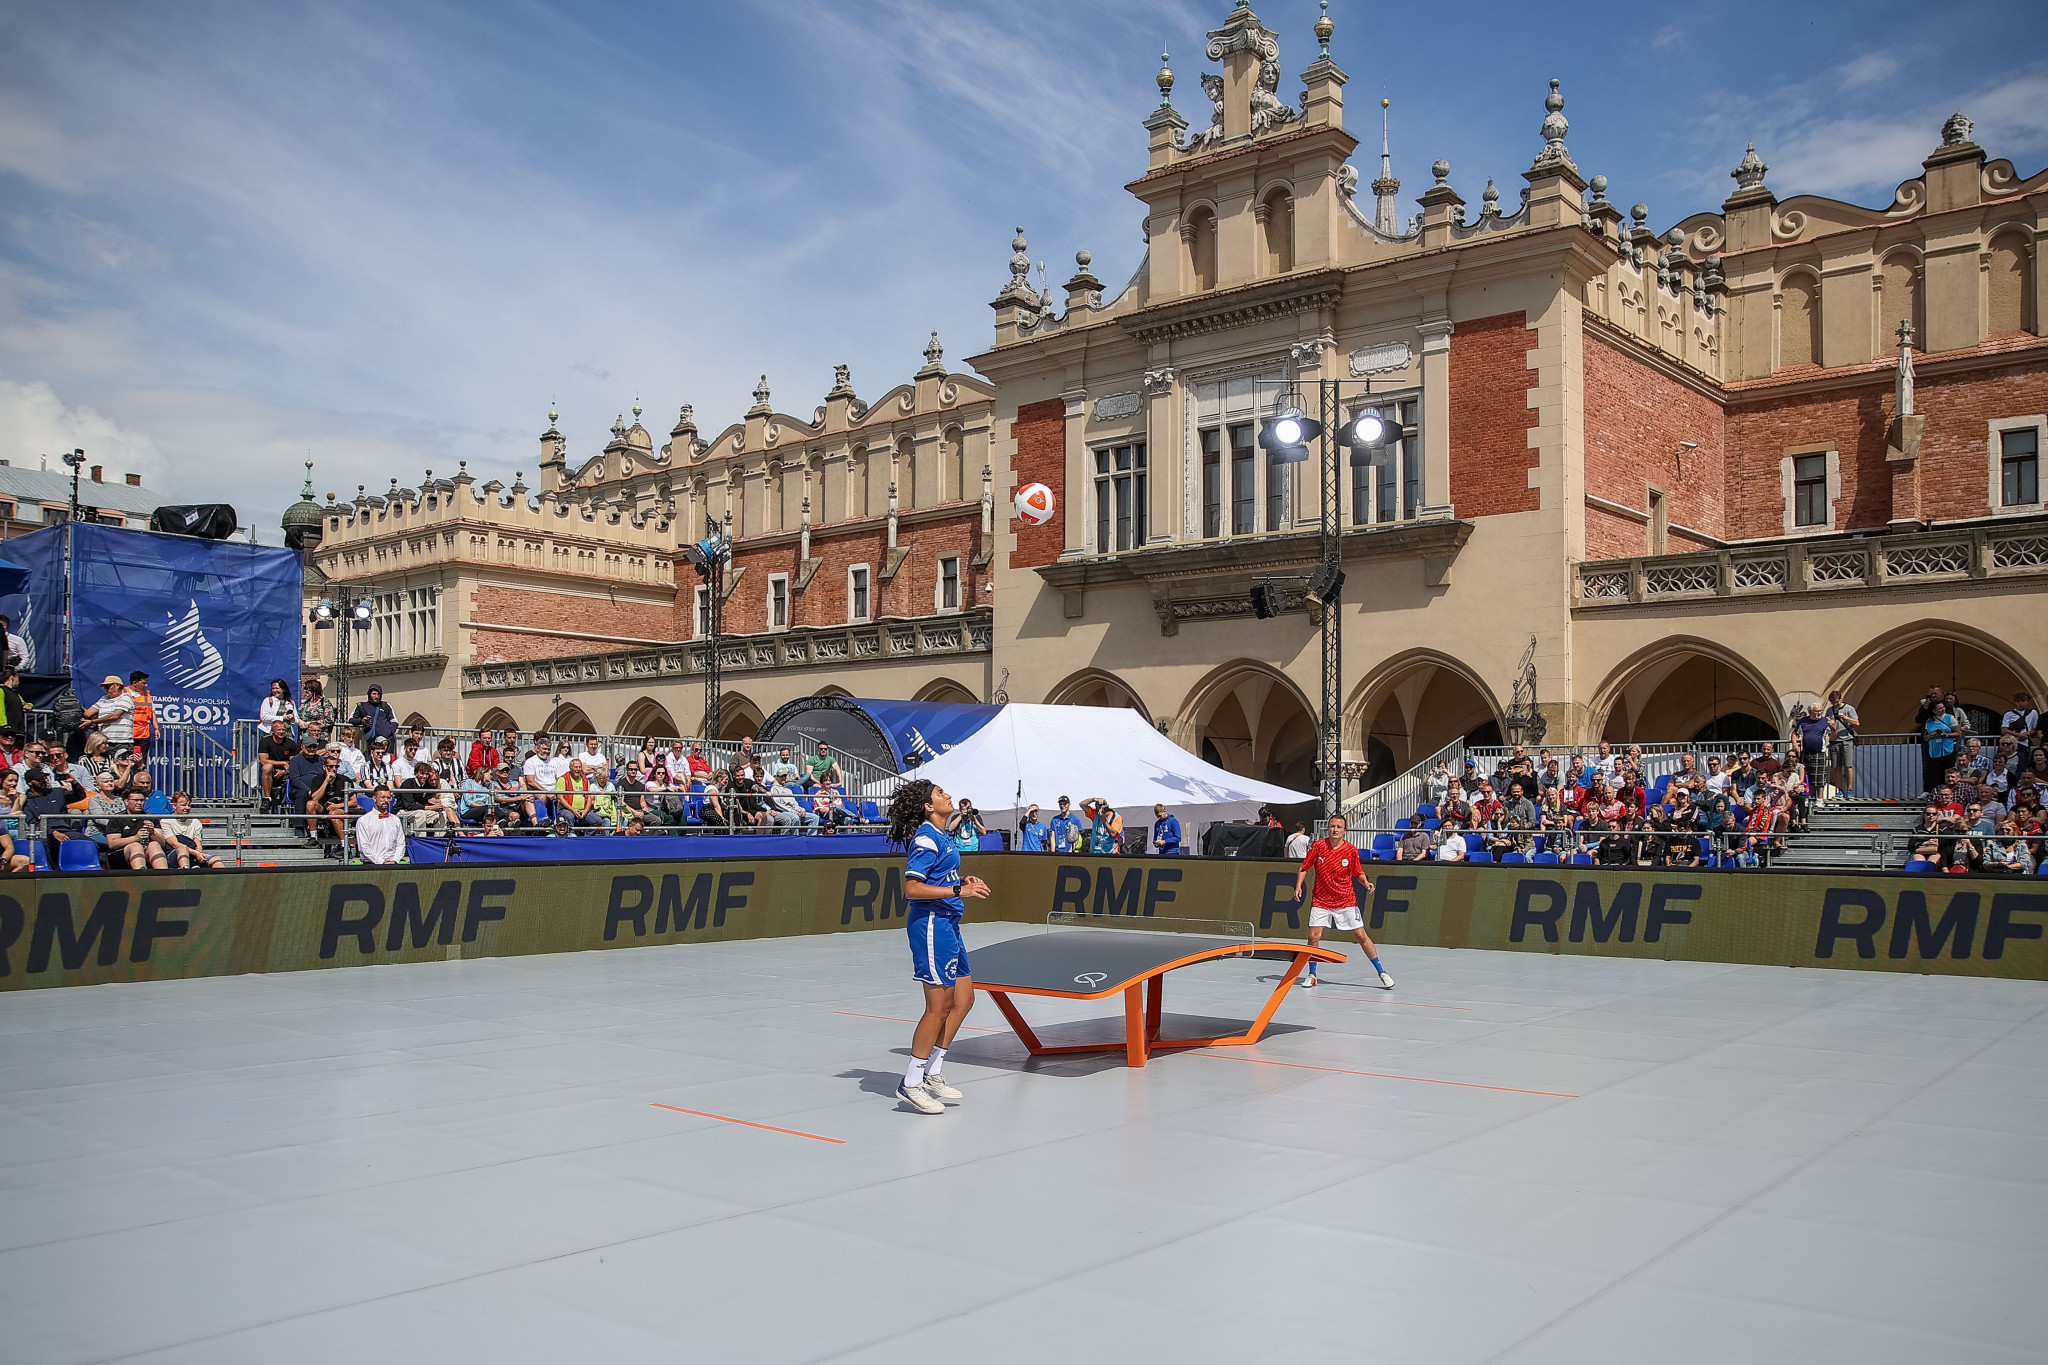 Competition returned to Kraków's Main Square in teqball, after padel was staged there on Sunday (June 25) ©Kraków-Małopolska 2023